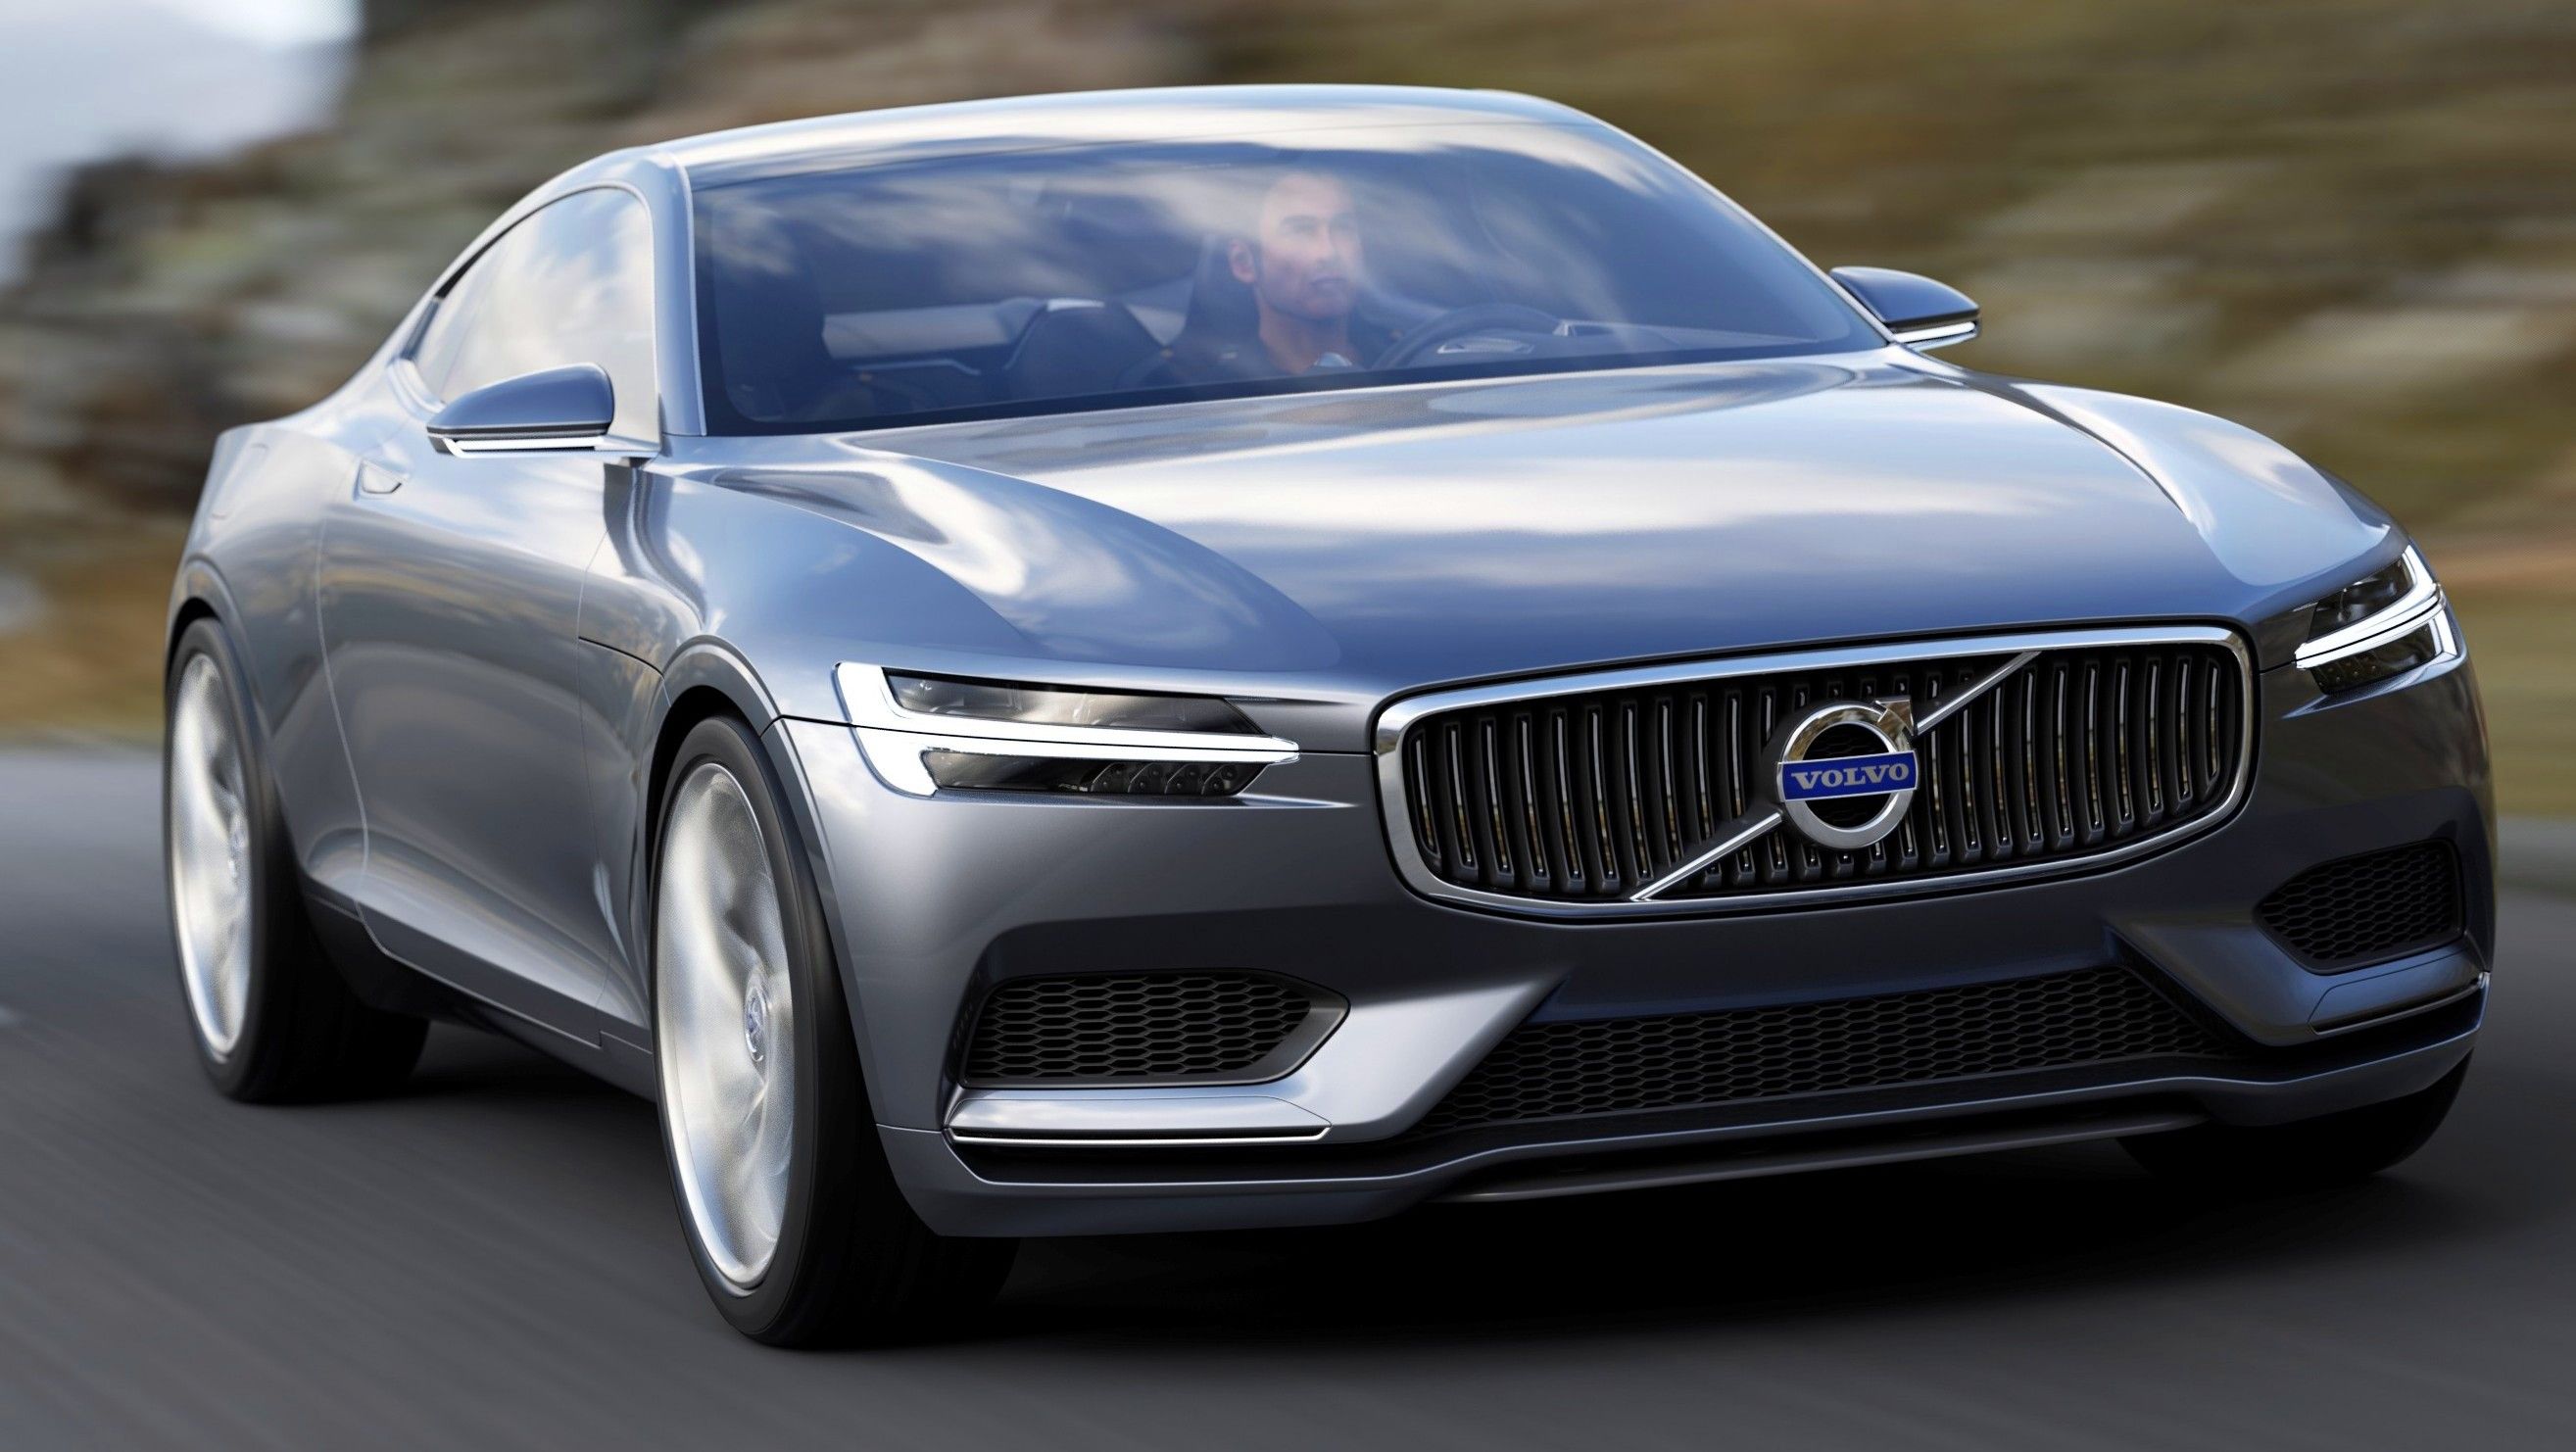  Volvo is hard at work on the S90, will it look like this concept?